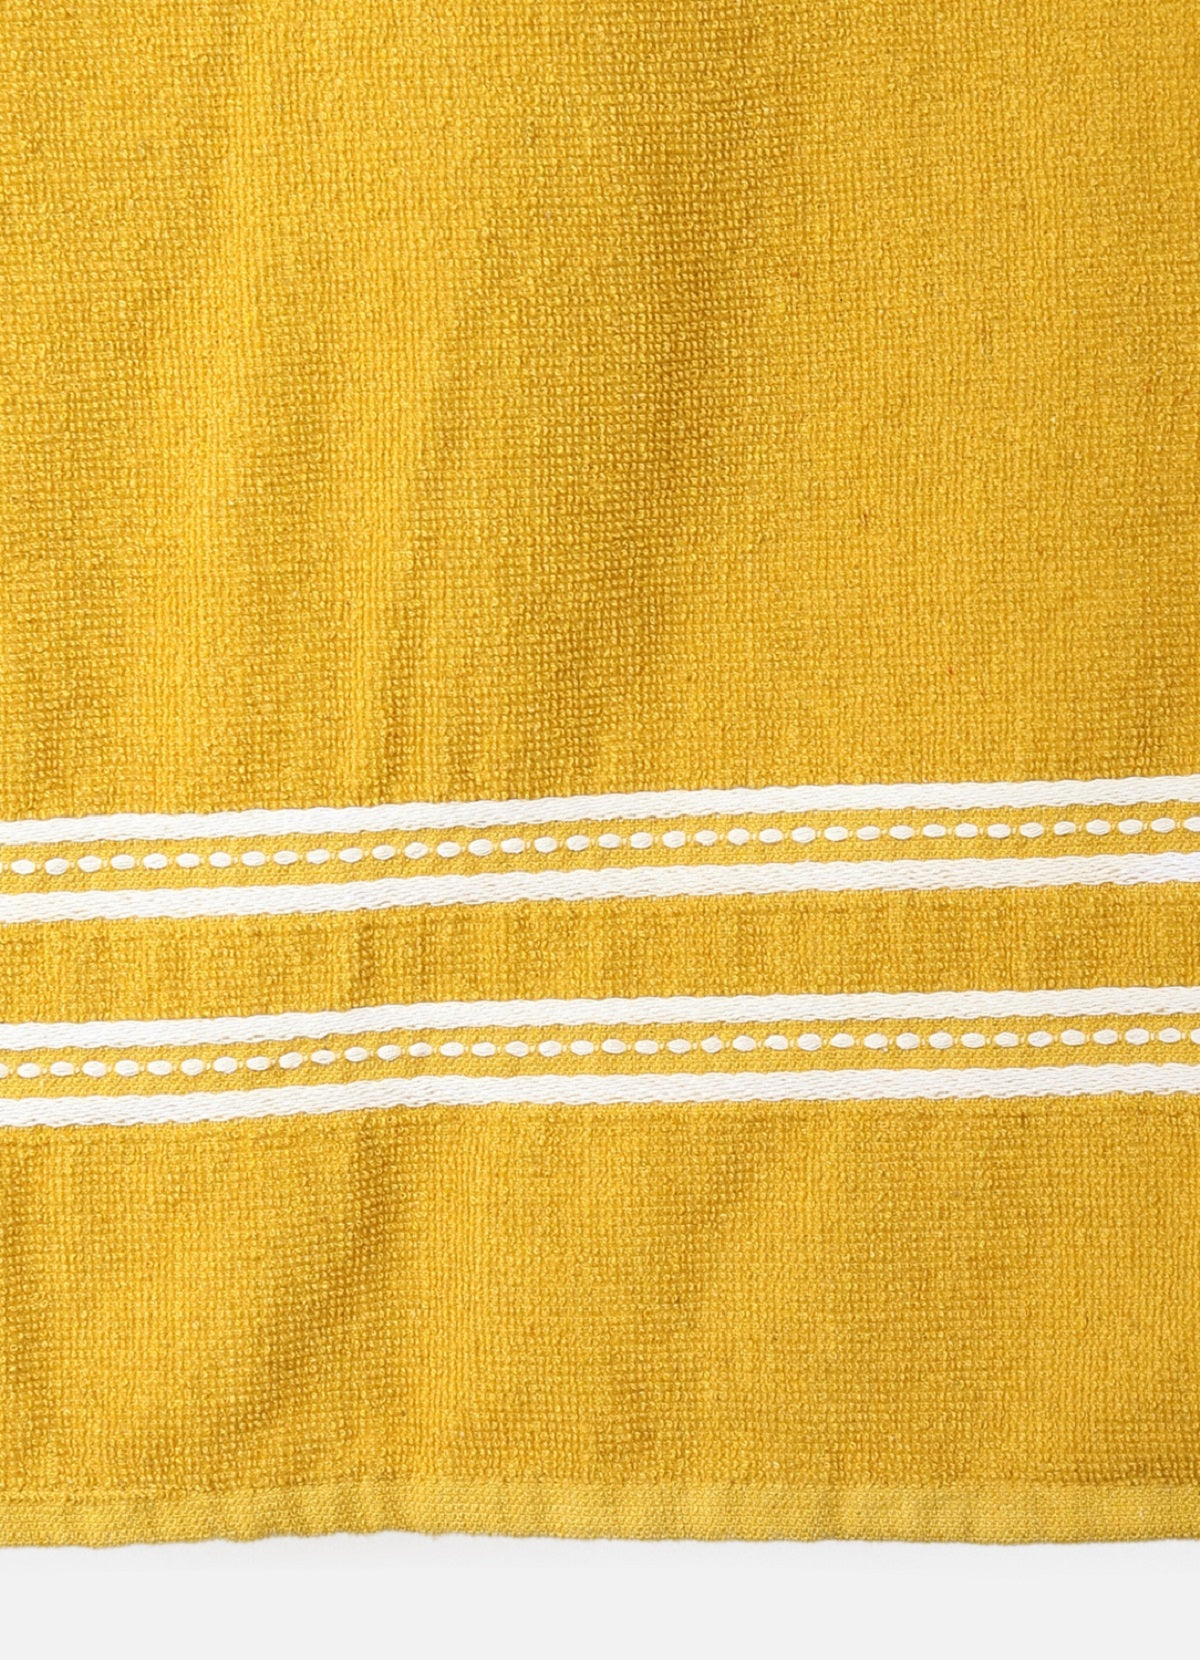 Yellow Solid Patterned Cotton Towel